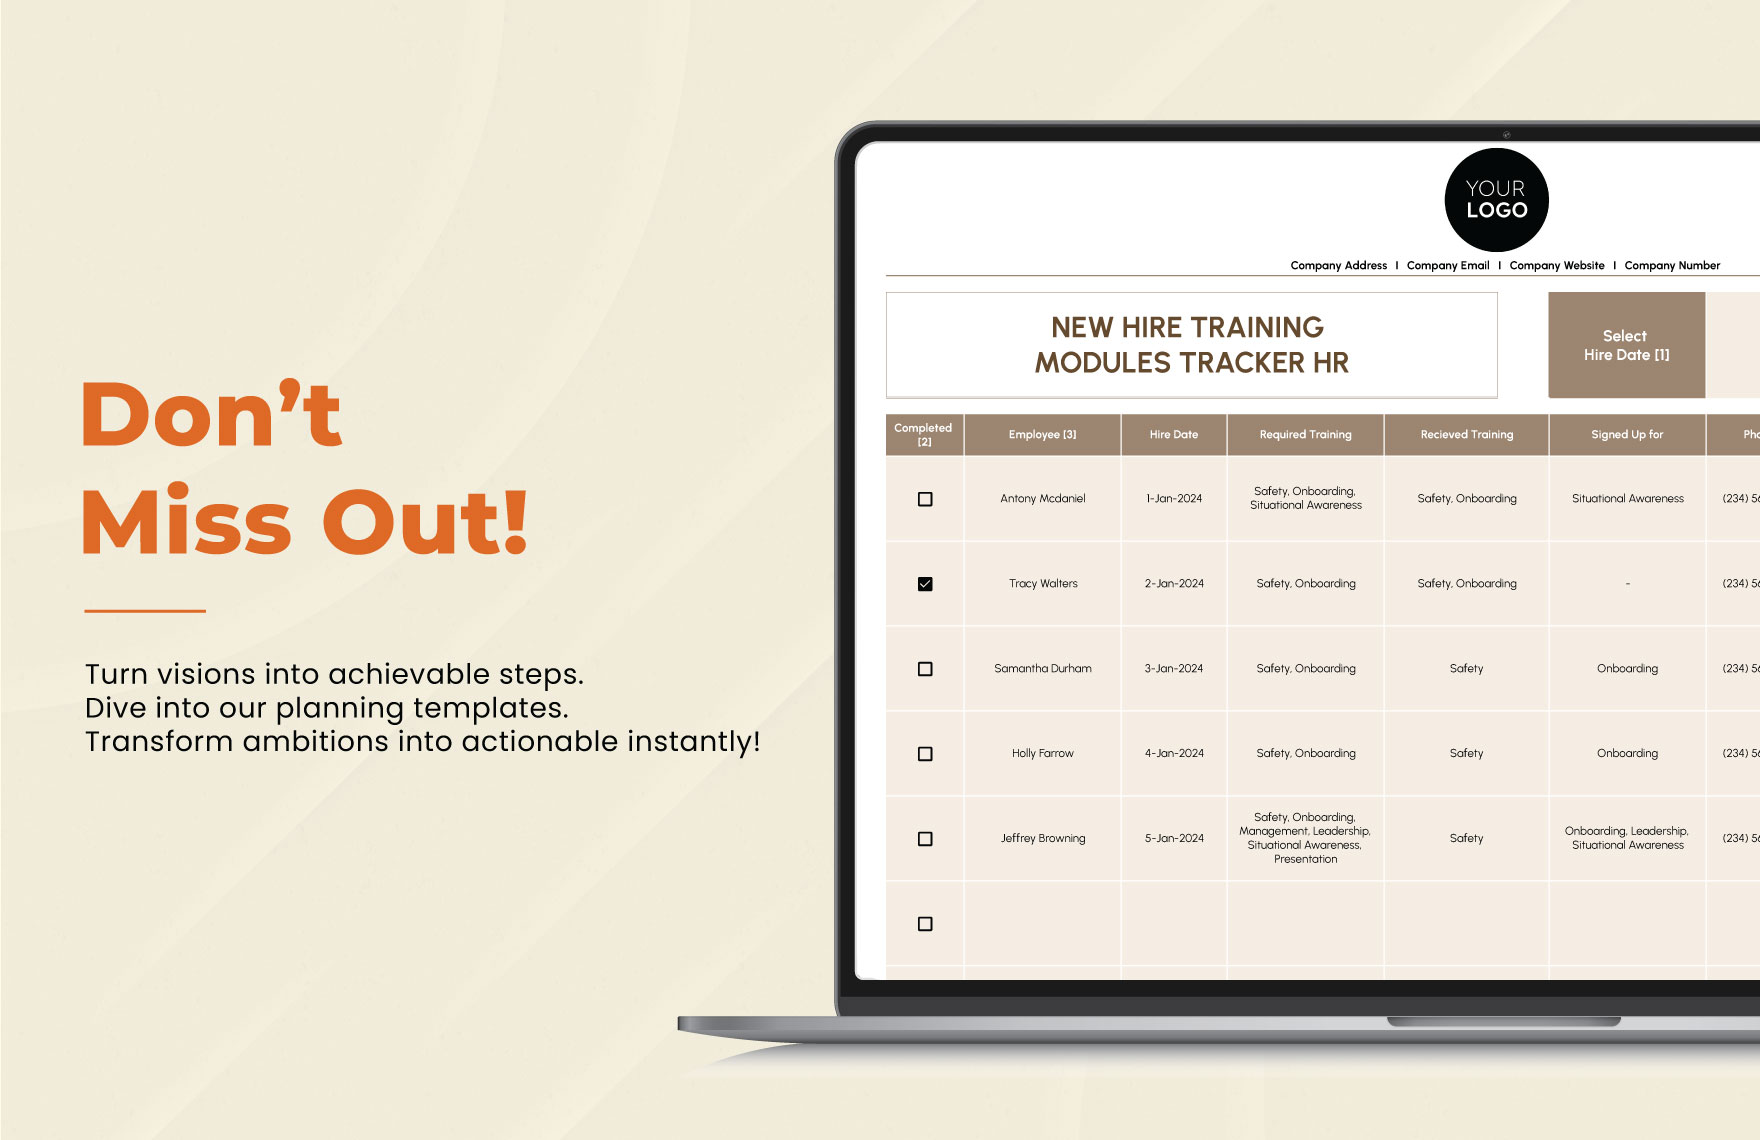 New Hire Training Modules Tracker HR Template